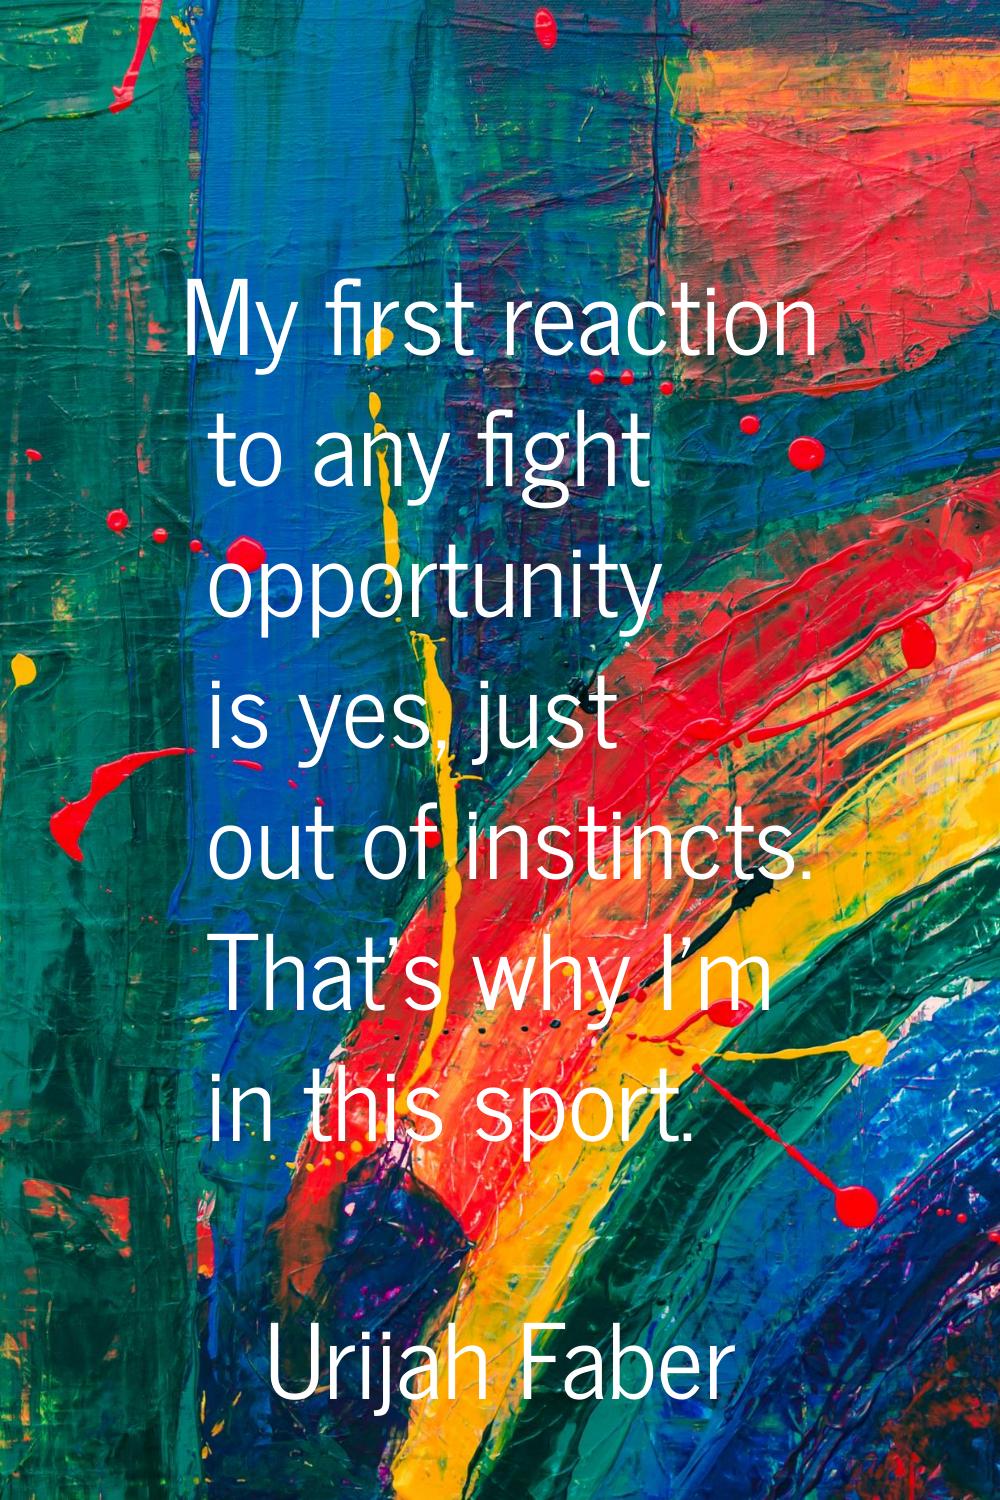 My first reaction to any fight opportunity is yes, just out of instincts. That's why I'm in this sp